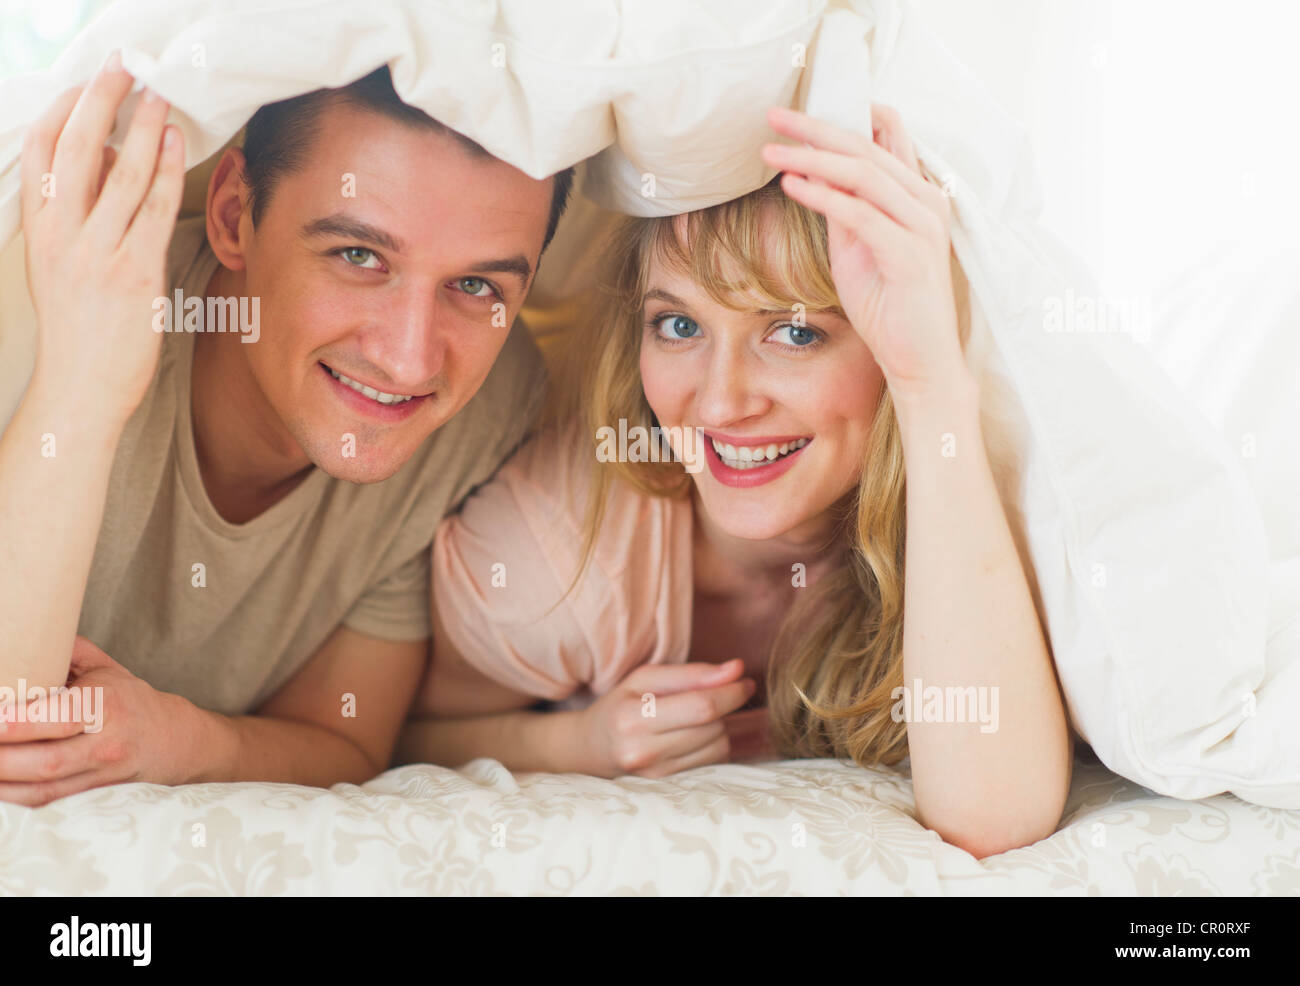 USA, New Jersey, Jersey City, Couple lying on bed sous couette Banque D'Images